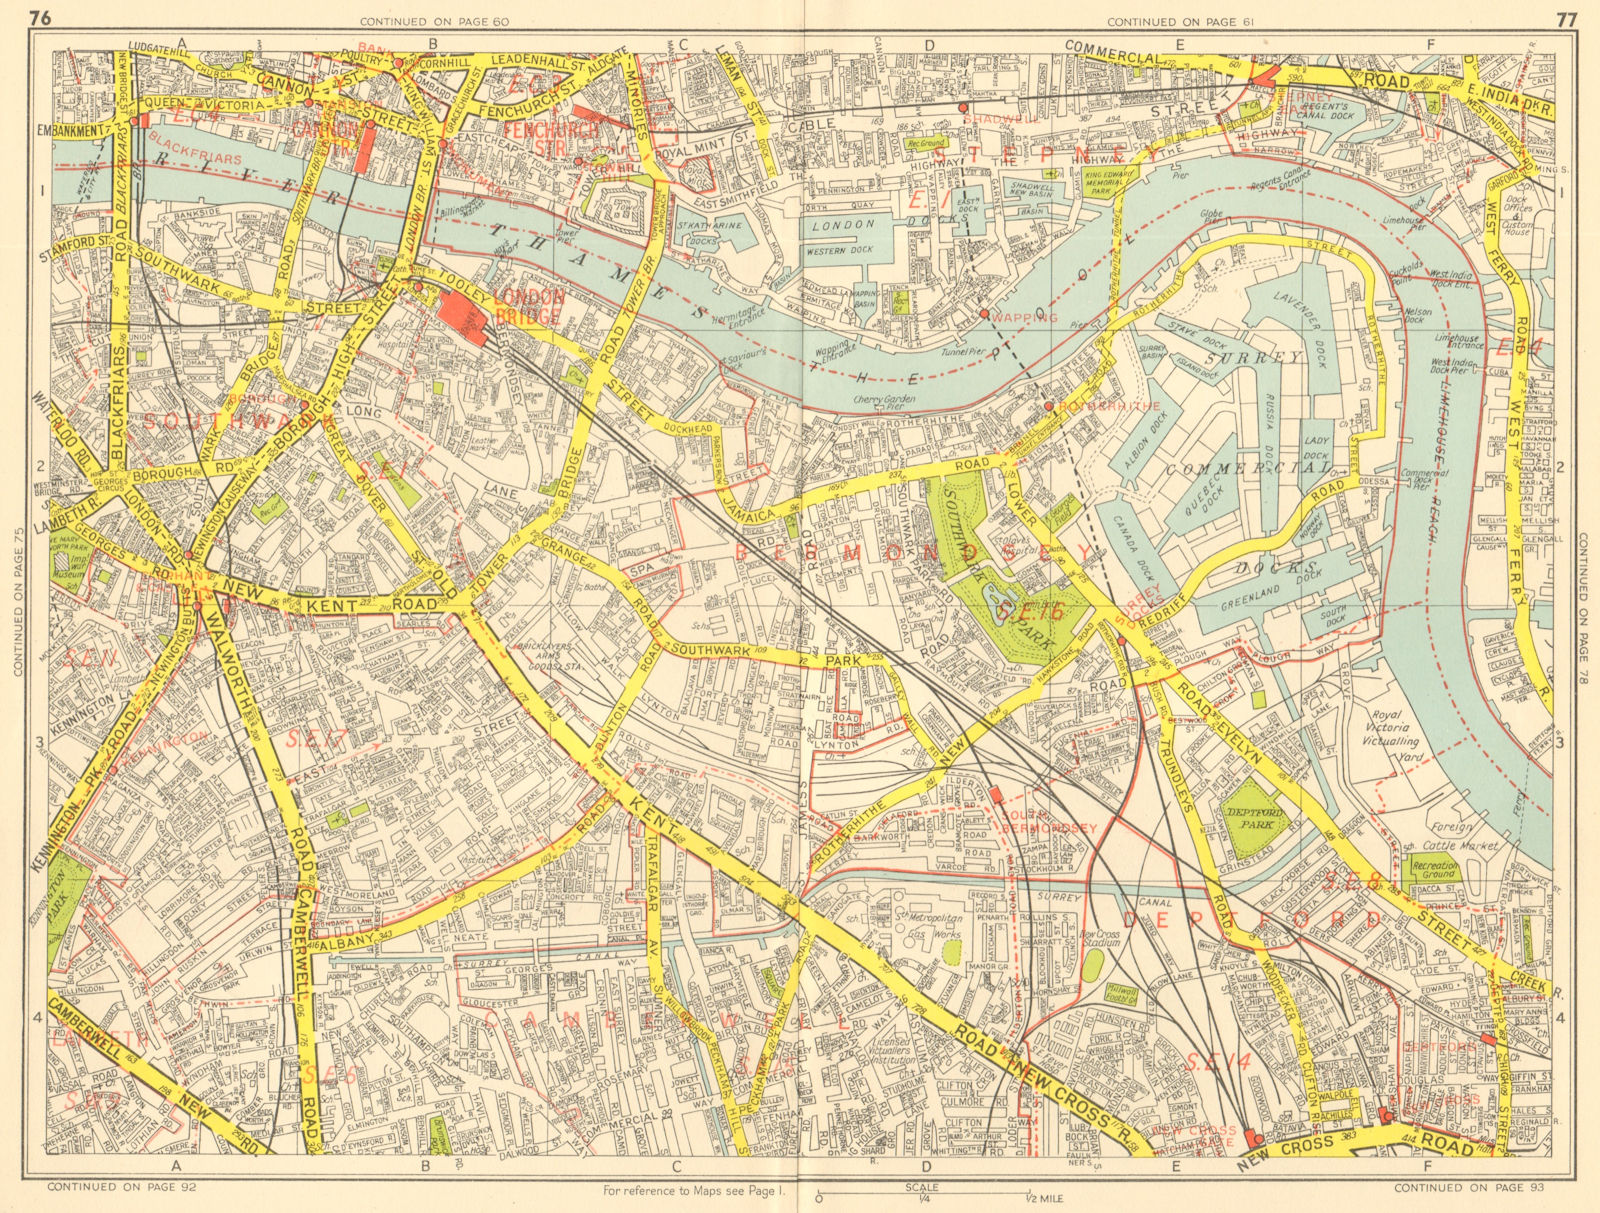 Associate Product SOUTHWARK Bermondsey Wapping Rotherhithe Camberwell. GEOGRAPHERS' A-Z 1959 map